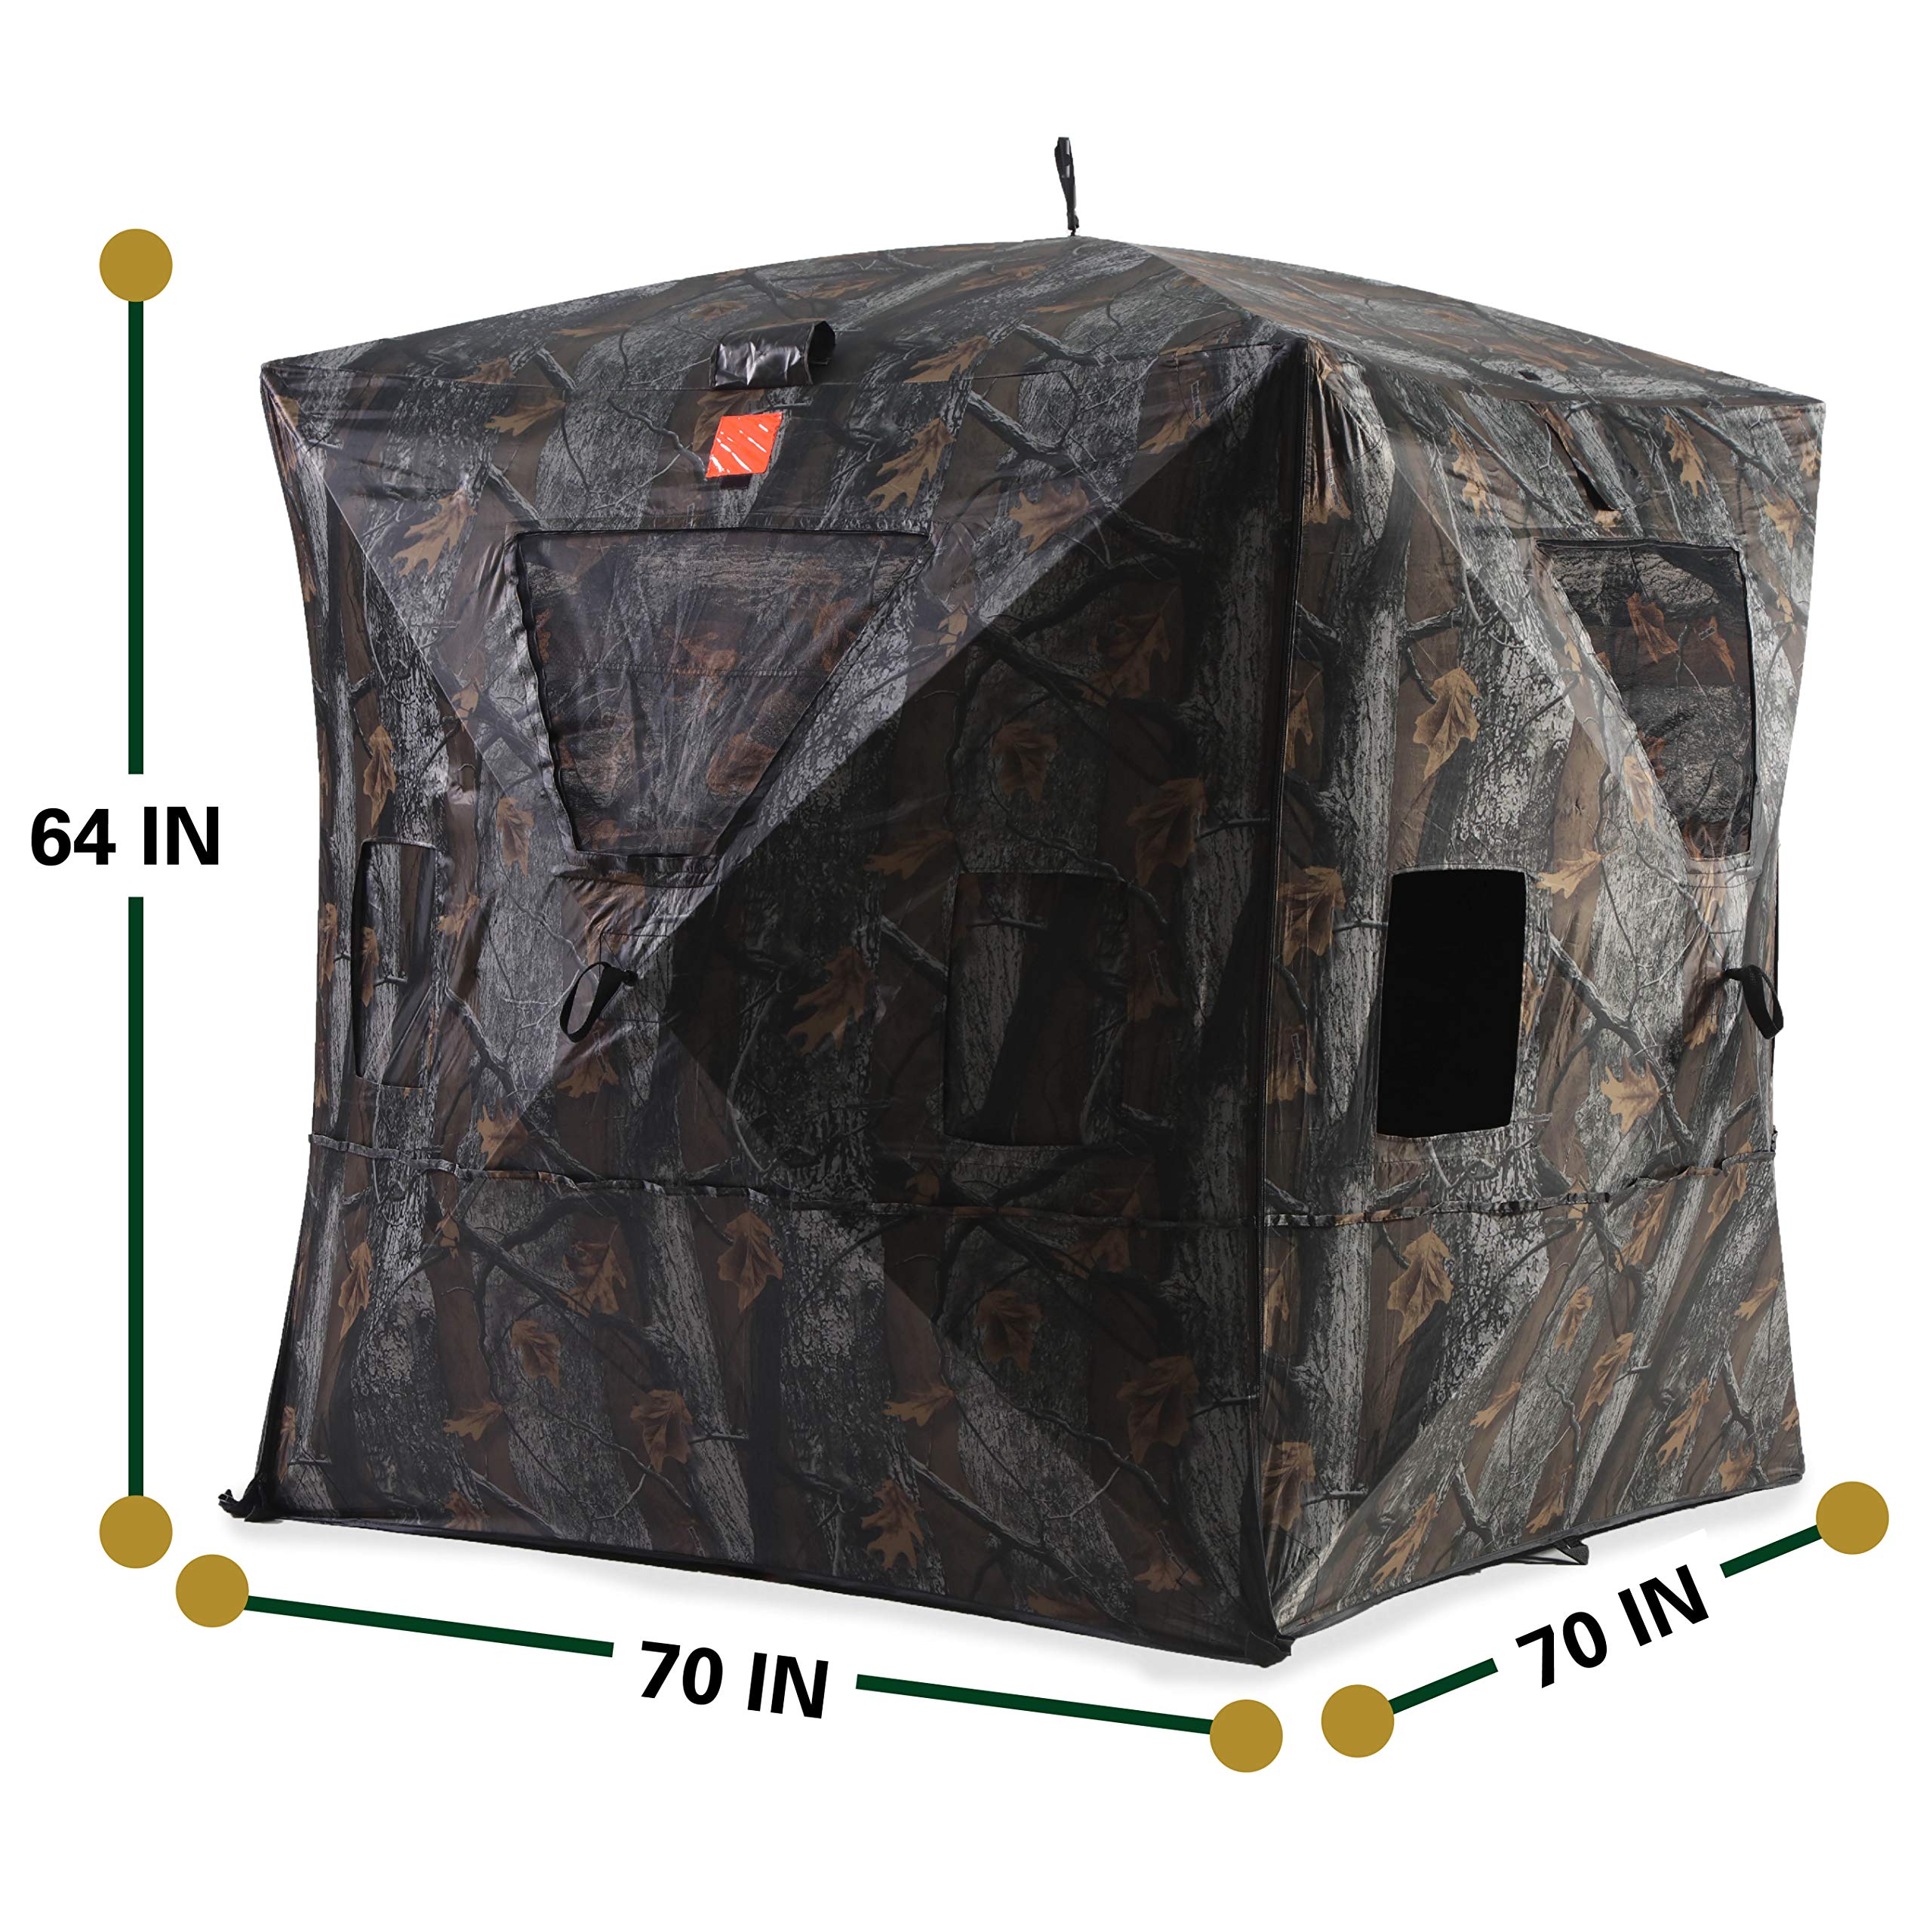 Black Hoof Outdoors Deluxe Hunting Blind, Ground Blind for Deer & Turkey, Pop Up Hub Design Tent with Stakes for 2-3 Person, Camouflage Screen and Adjustable Windows for Gun, Bow, & Photography